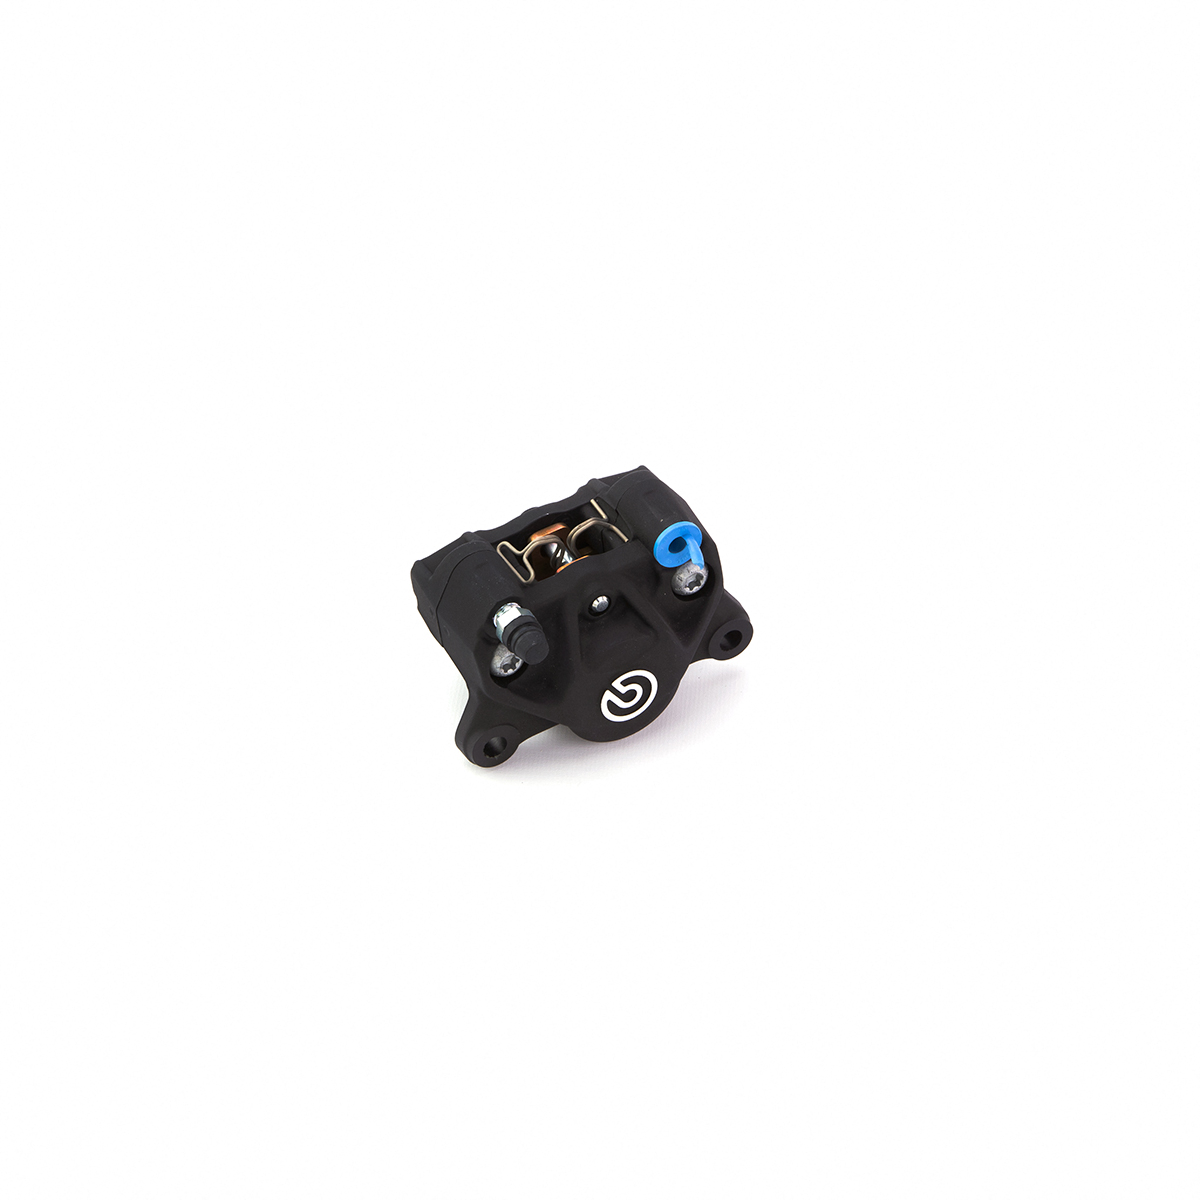 P34 axial mount